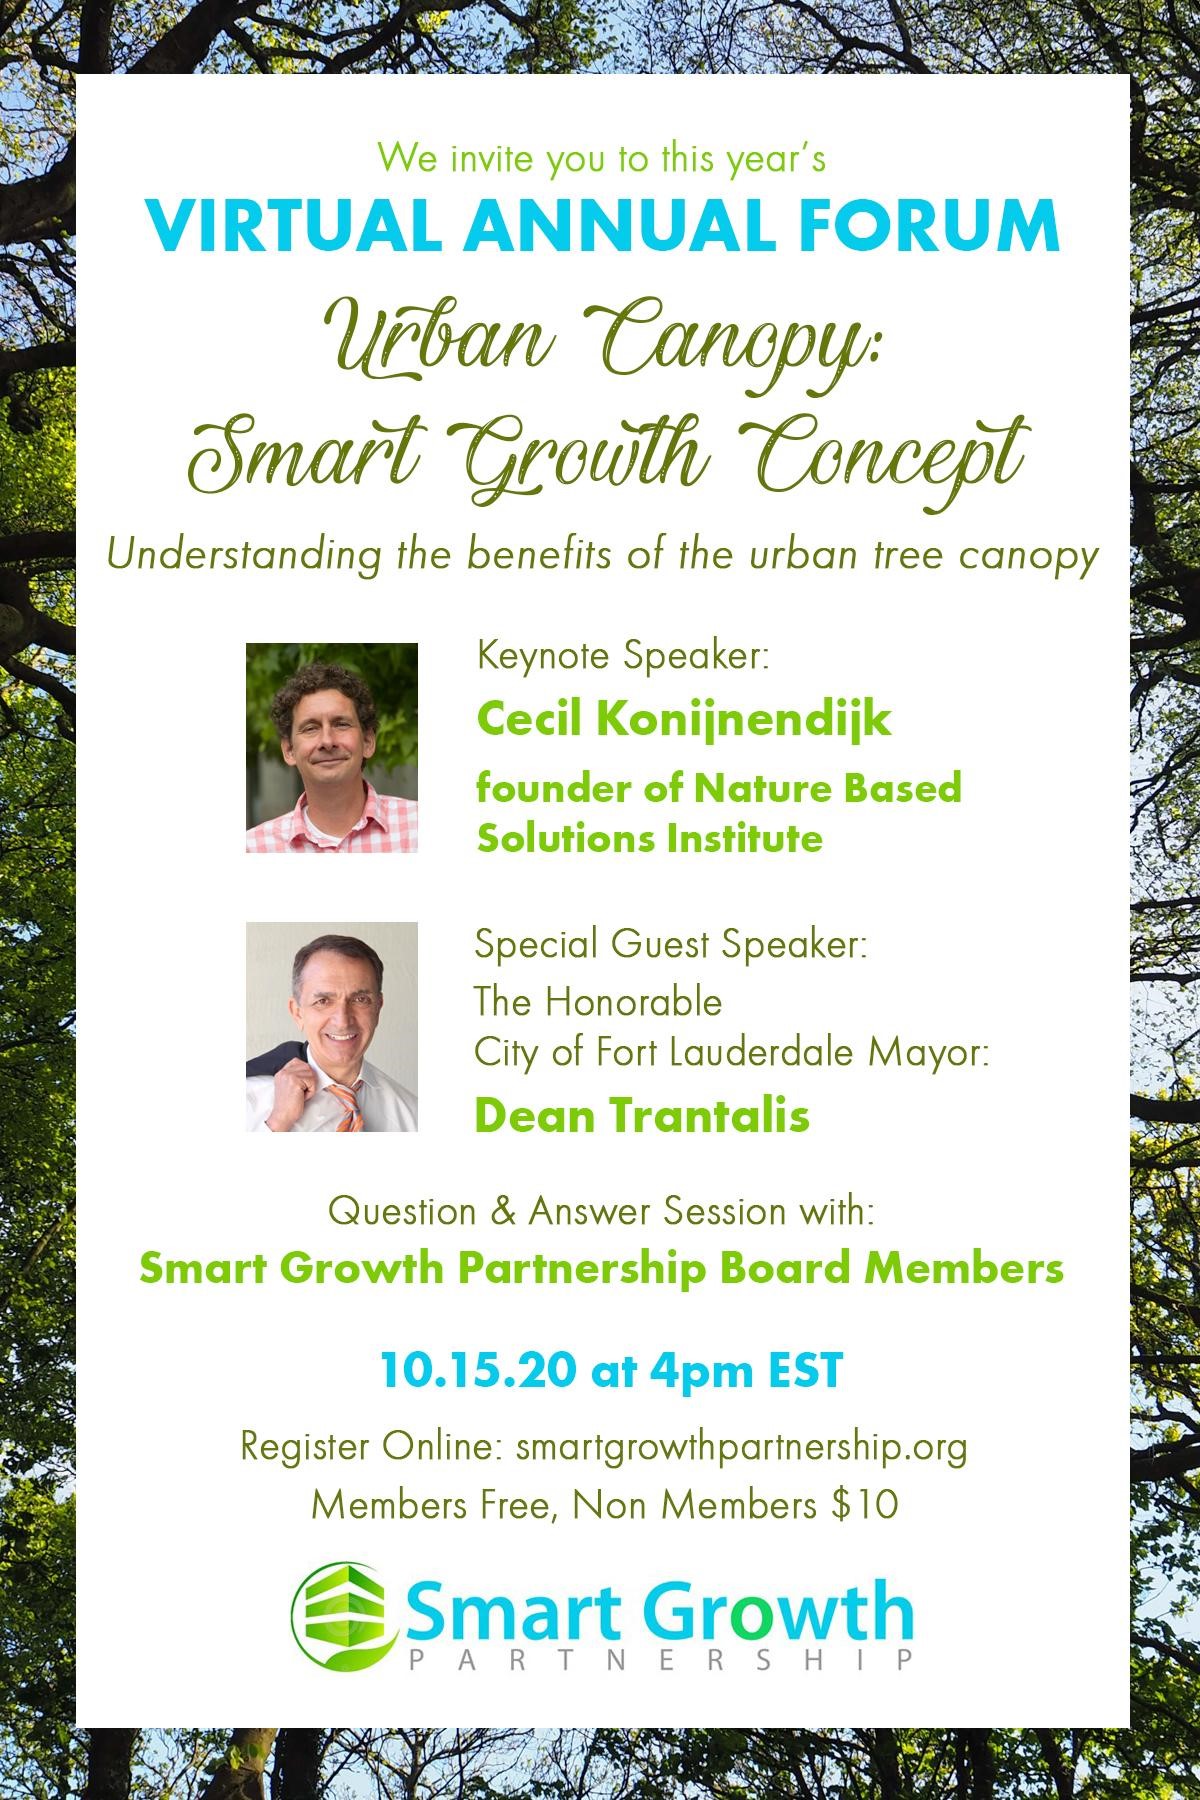 Urban Canopy: Smart Growth Concept